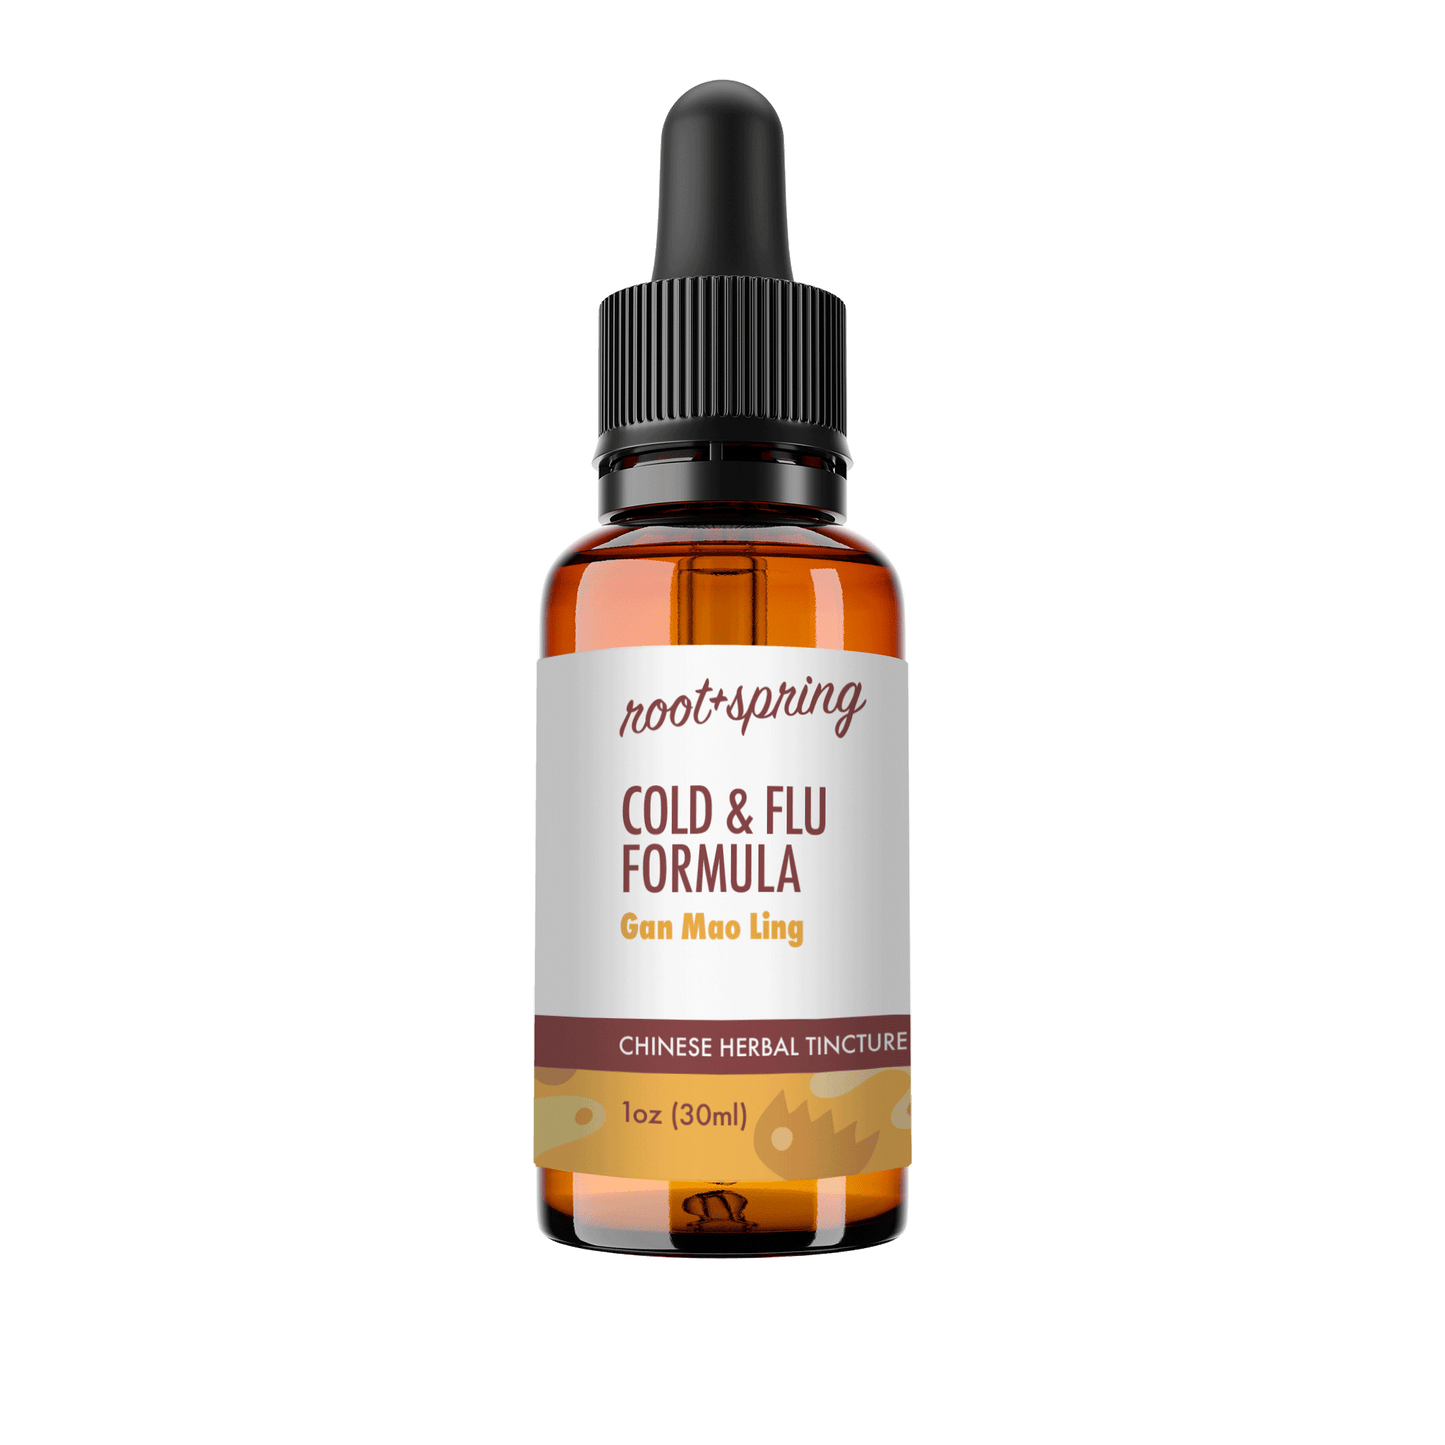 Amber eyedropper-top tincture bottle containing 1 fluid ounce (30 milliliters) of root + spring Cold and Flu Formula Gan Mao LIng Chinese herbal tincture.